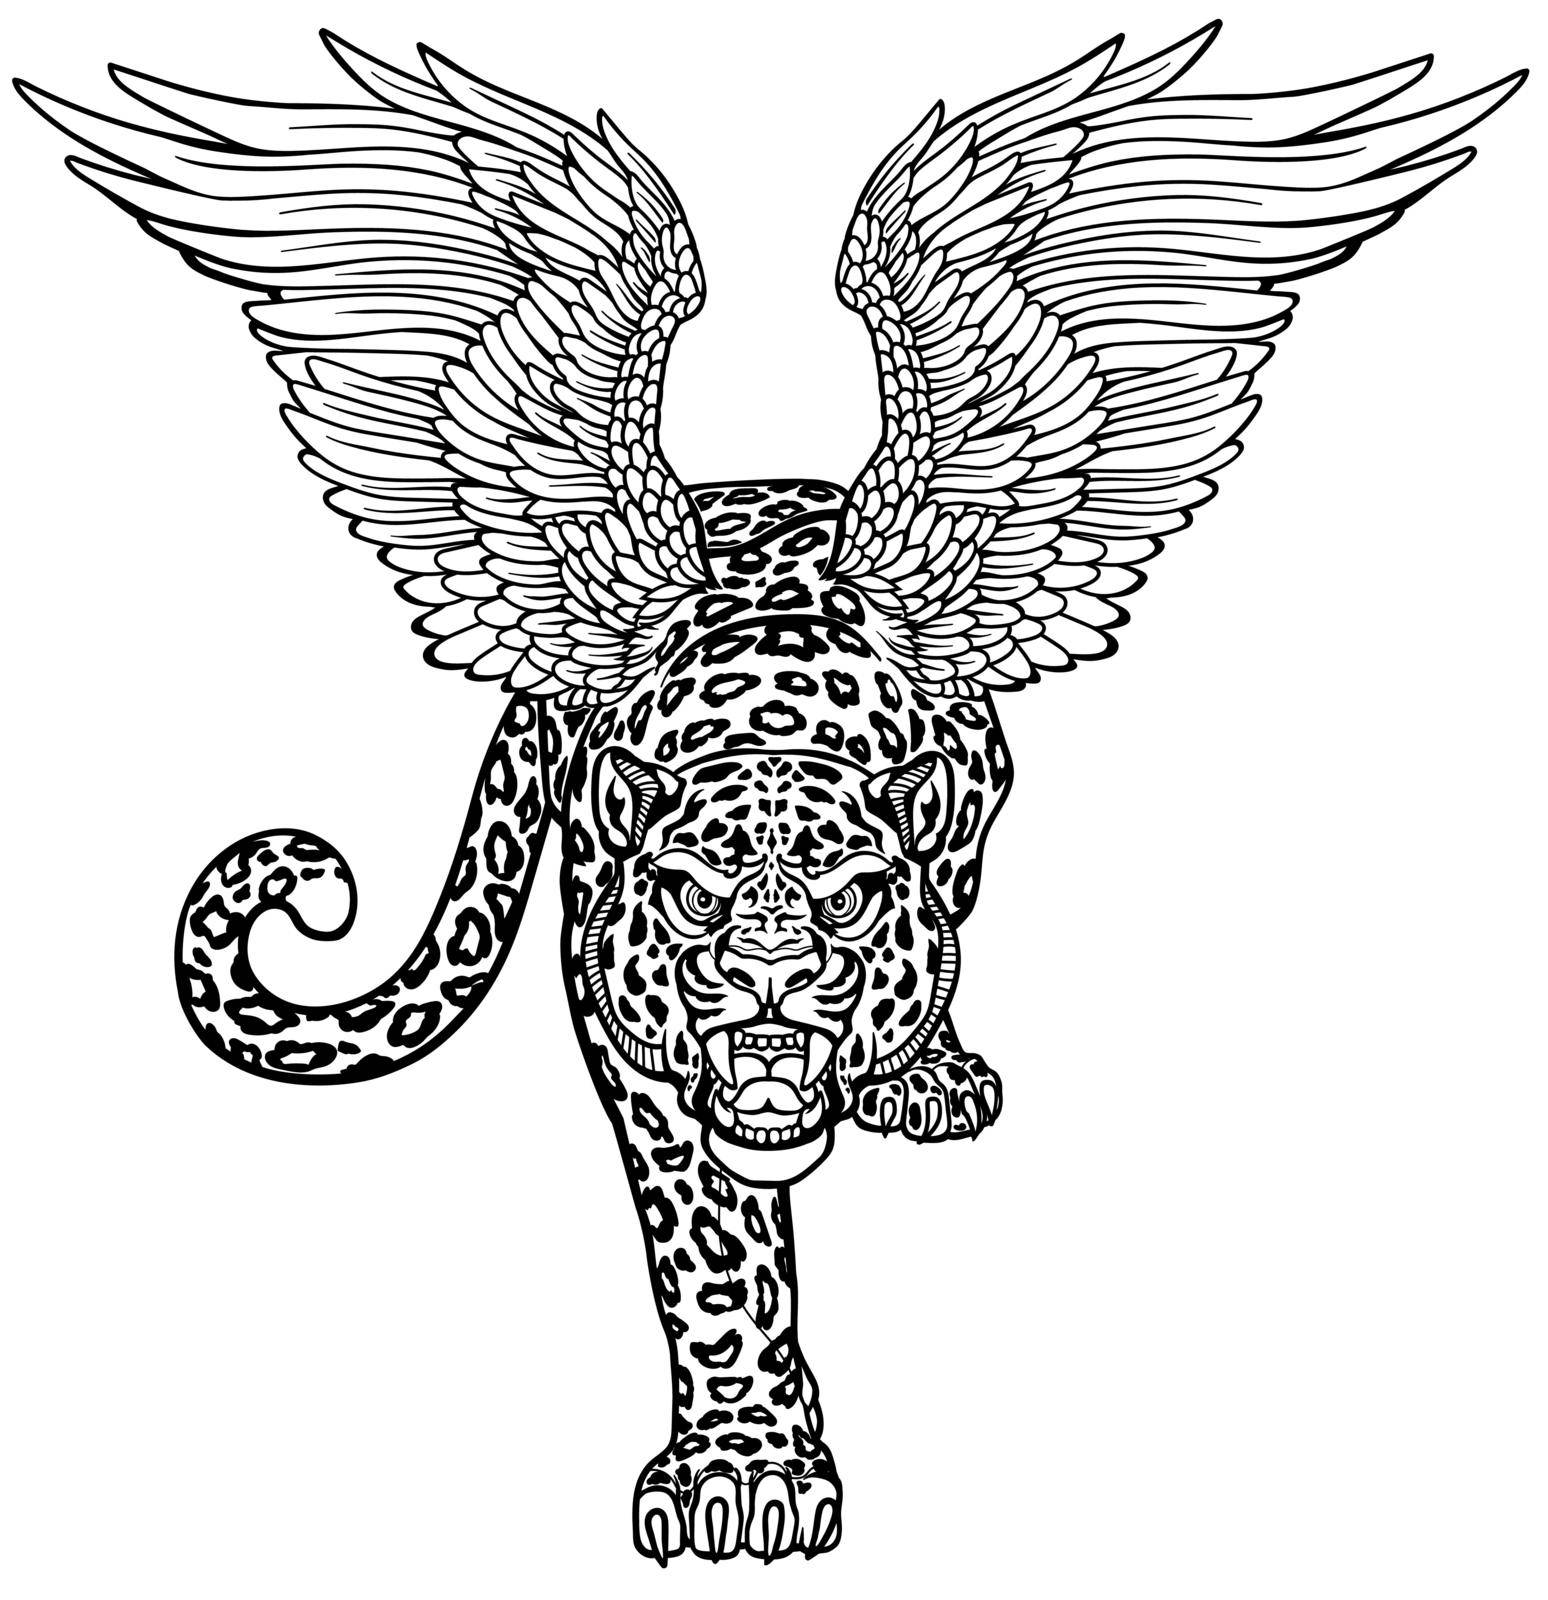 Aq Bars. Legendary winged snow leopard. Mythological big cat with open wings and gaze looking straight. Roaring aggressive creature crawl stalking. Front view. Black white tattoo style vector illustration